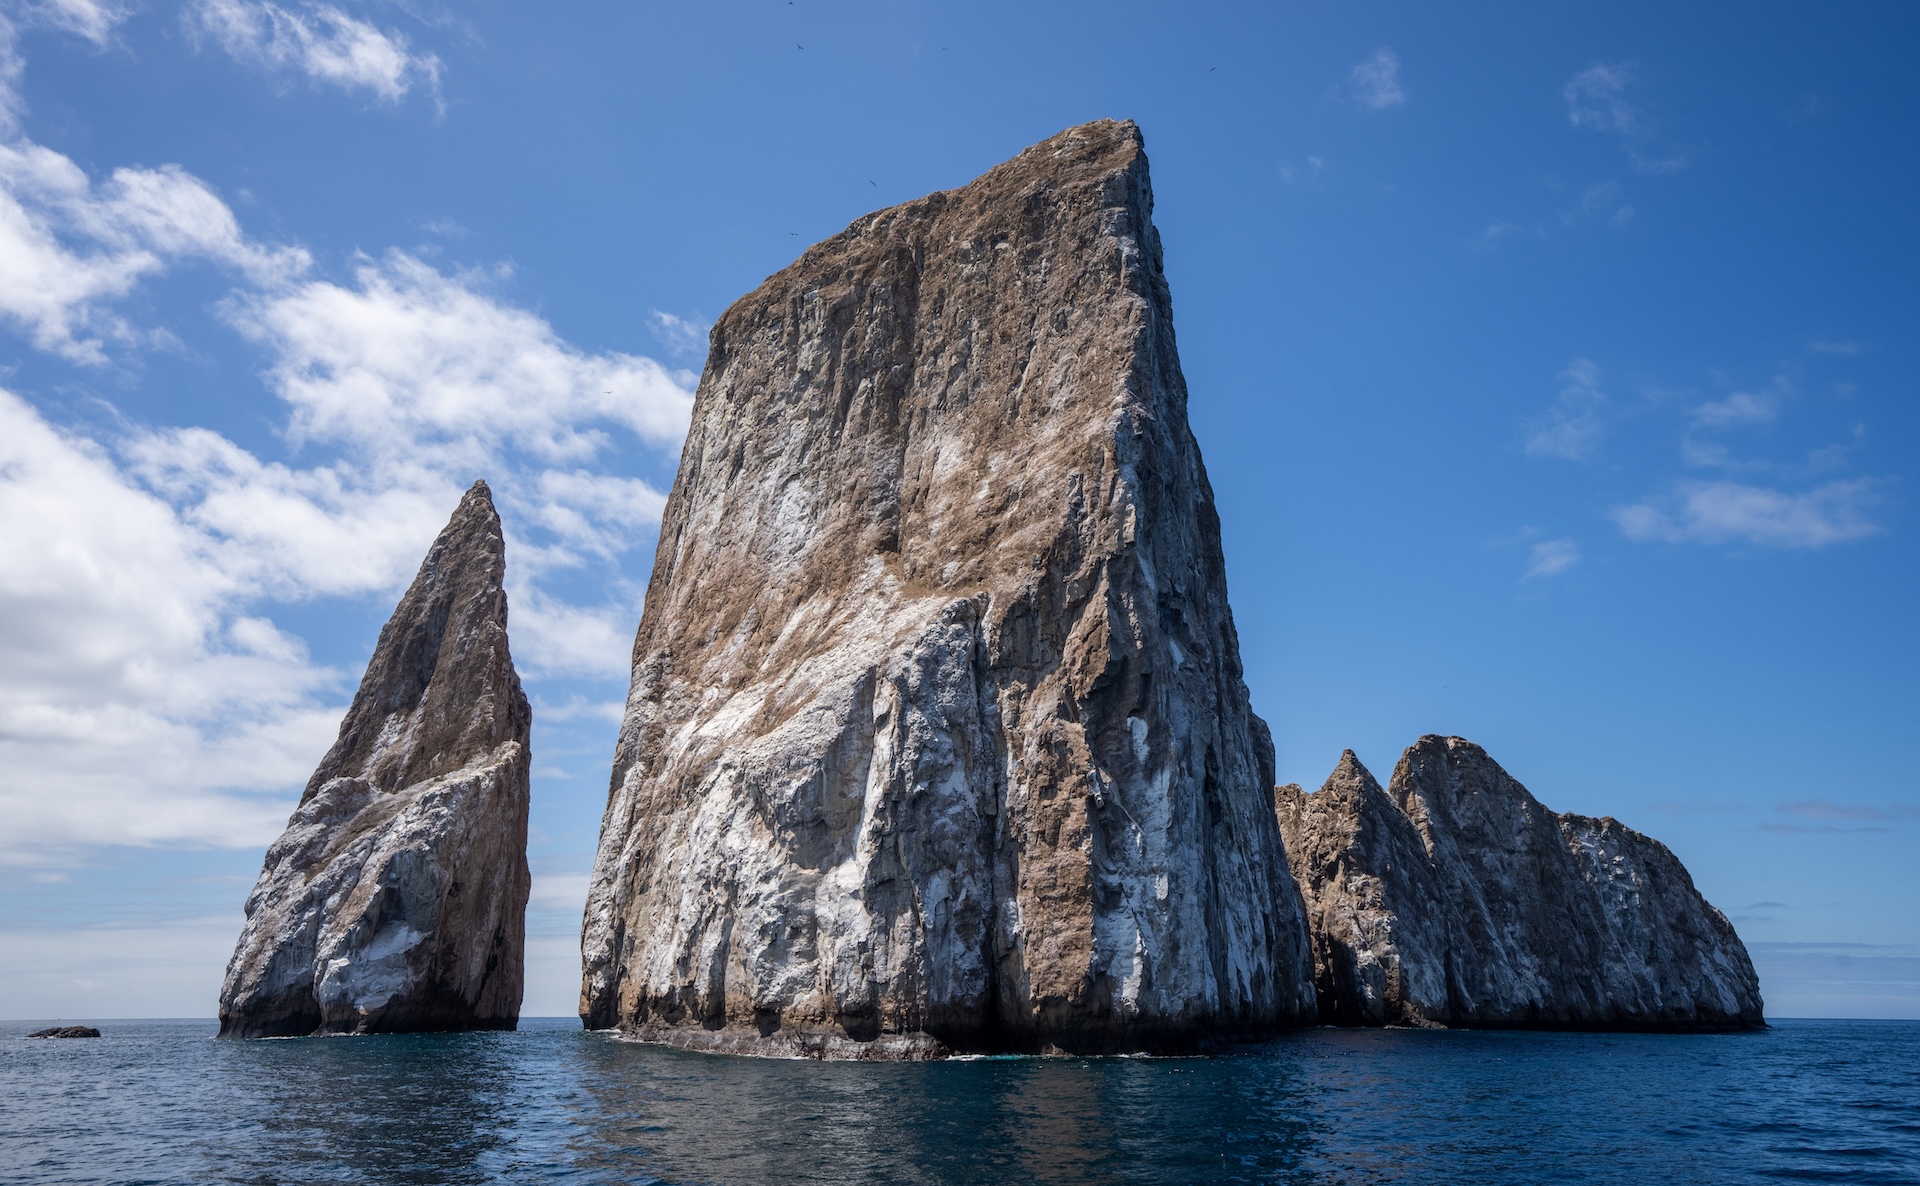 Kicker Rock in the Galapagos by Mike Hillman